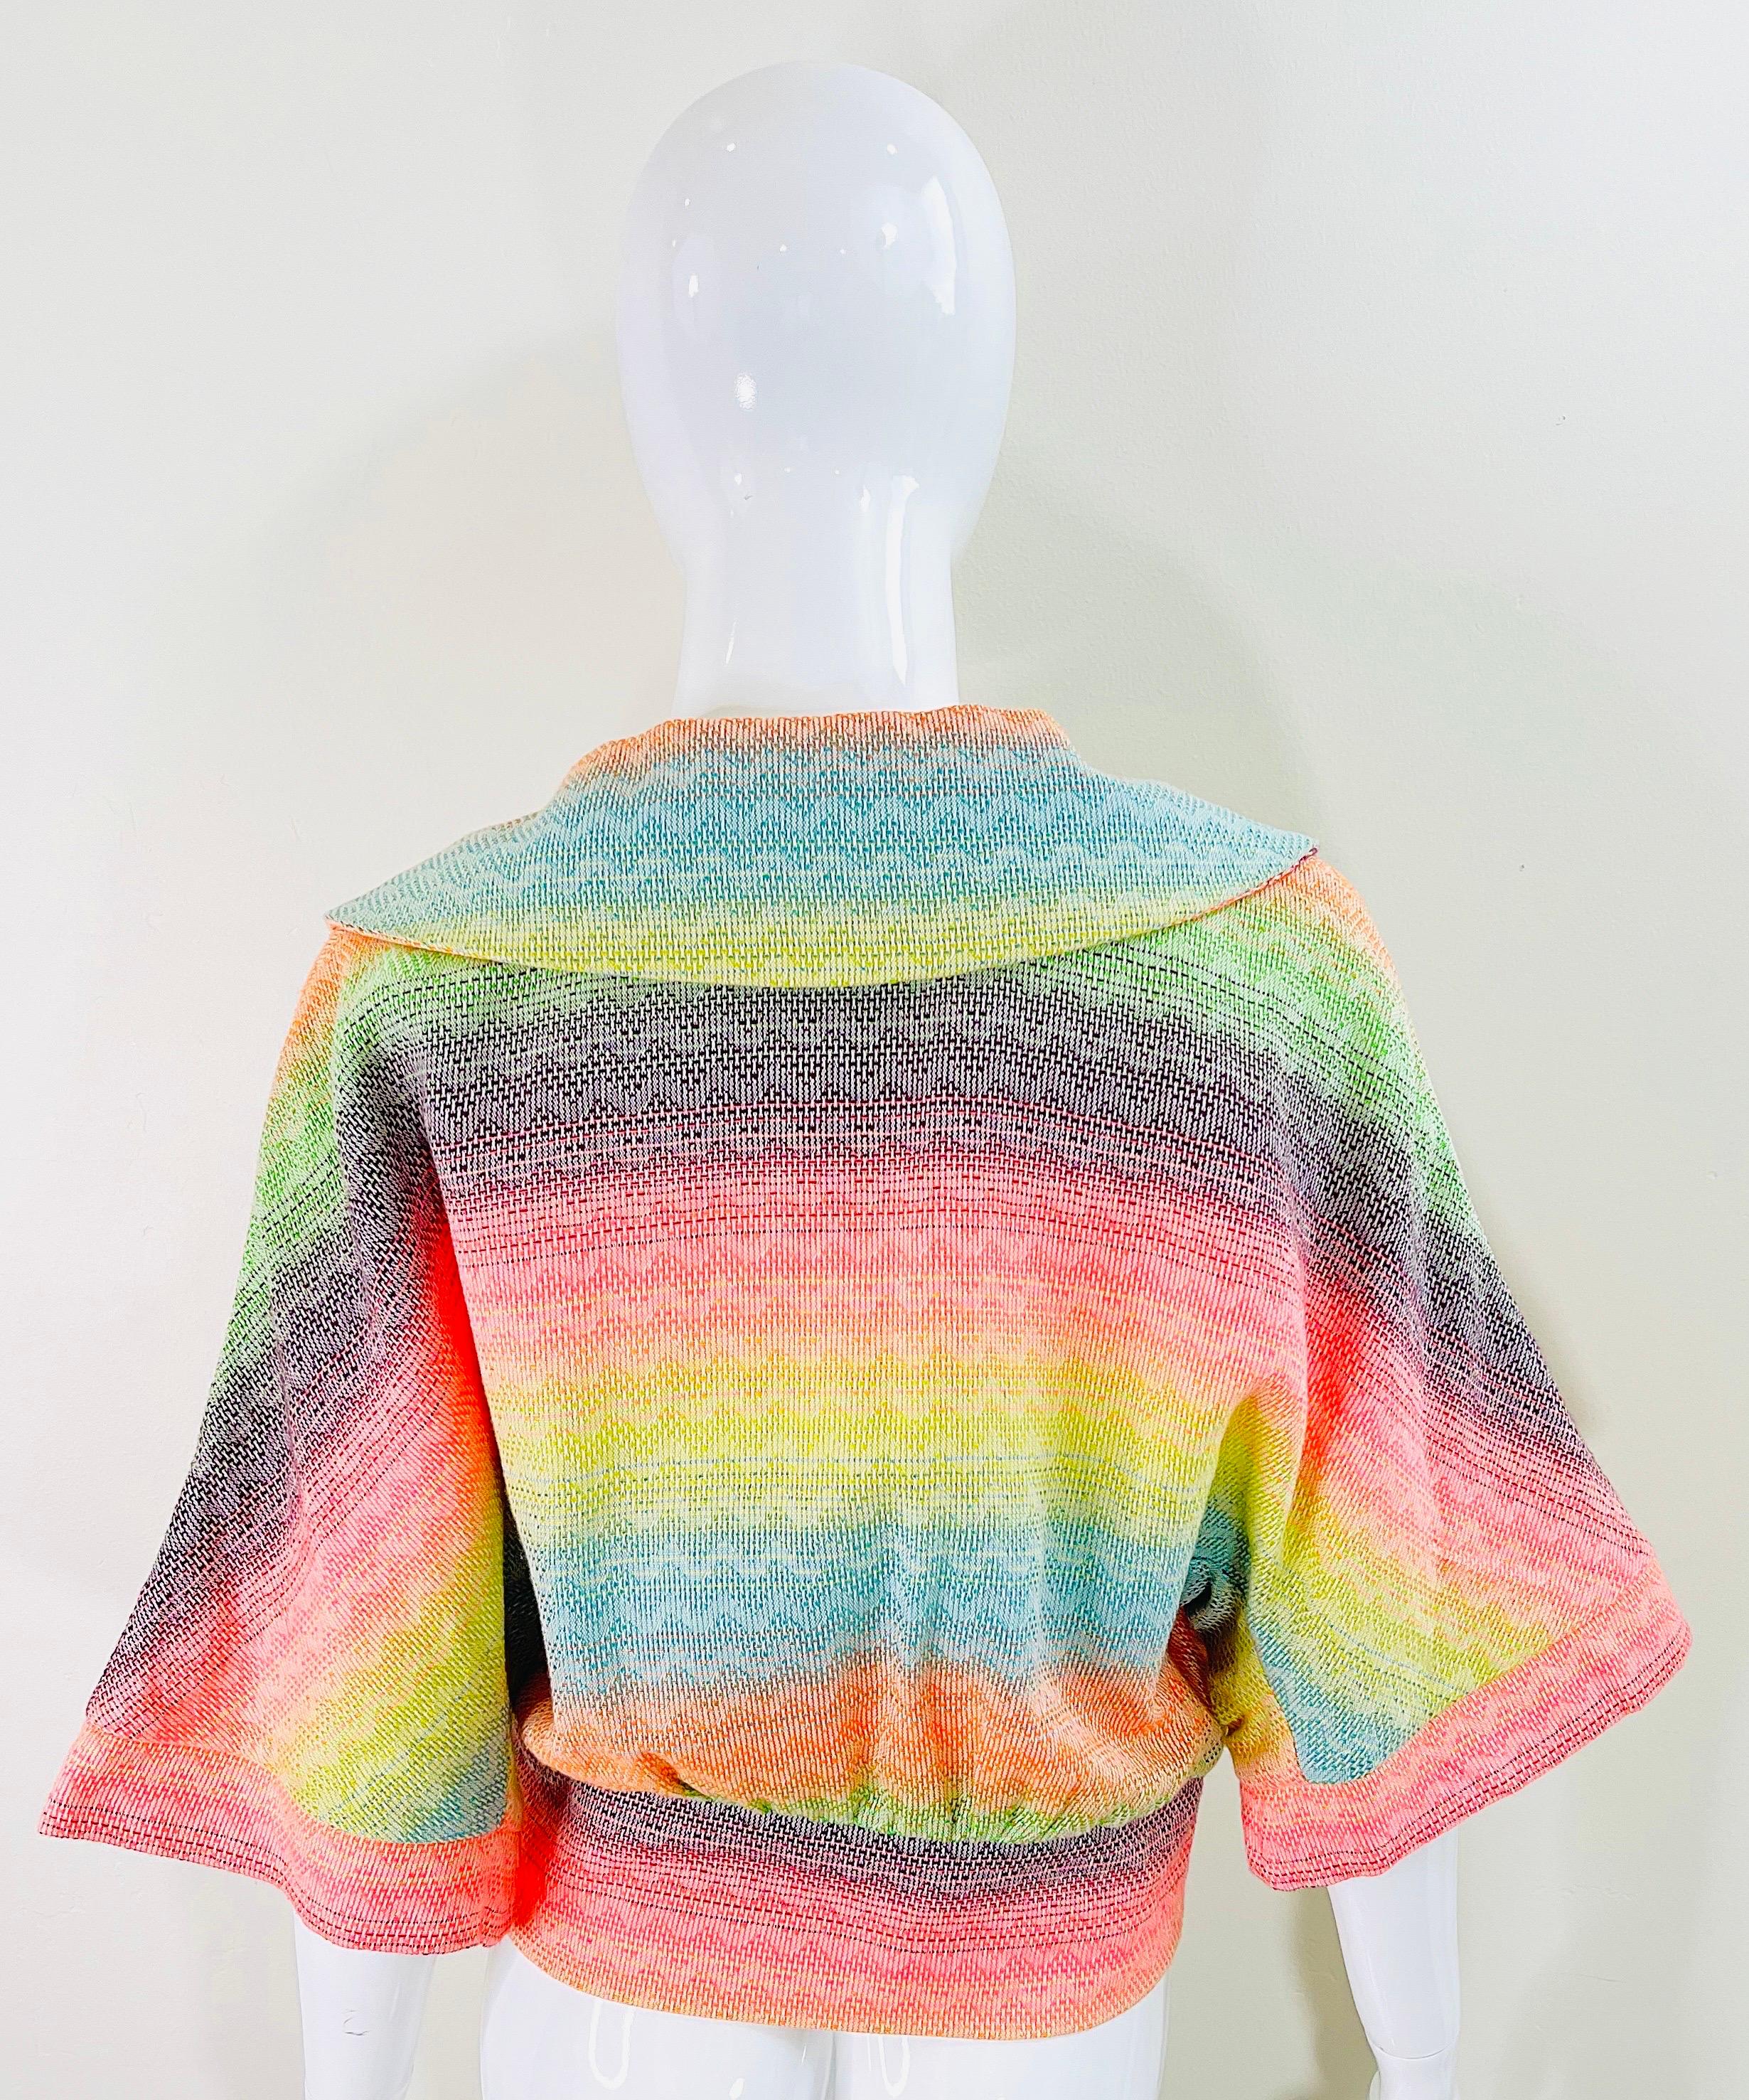 Matthew Williamson Spring 2002 Sz 8 Colorful Rainbow Striped 3/4 Sleeves Jacket  For Sale 9